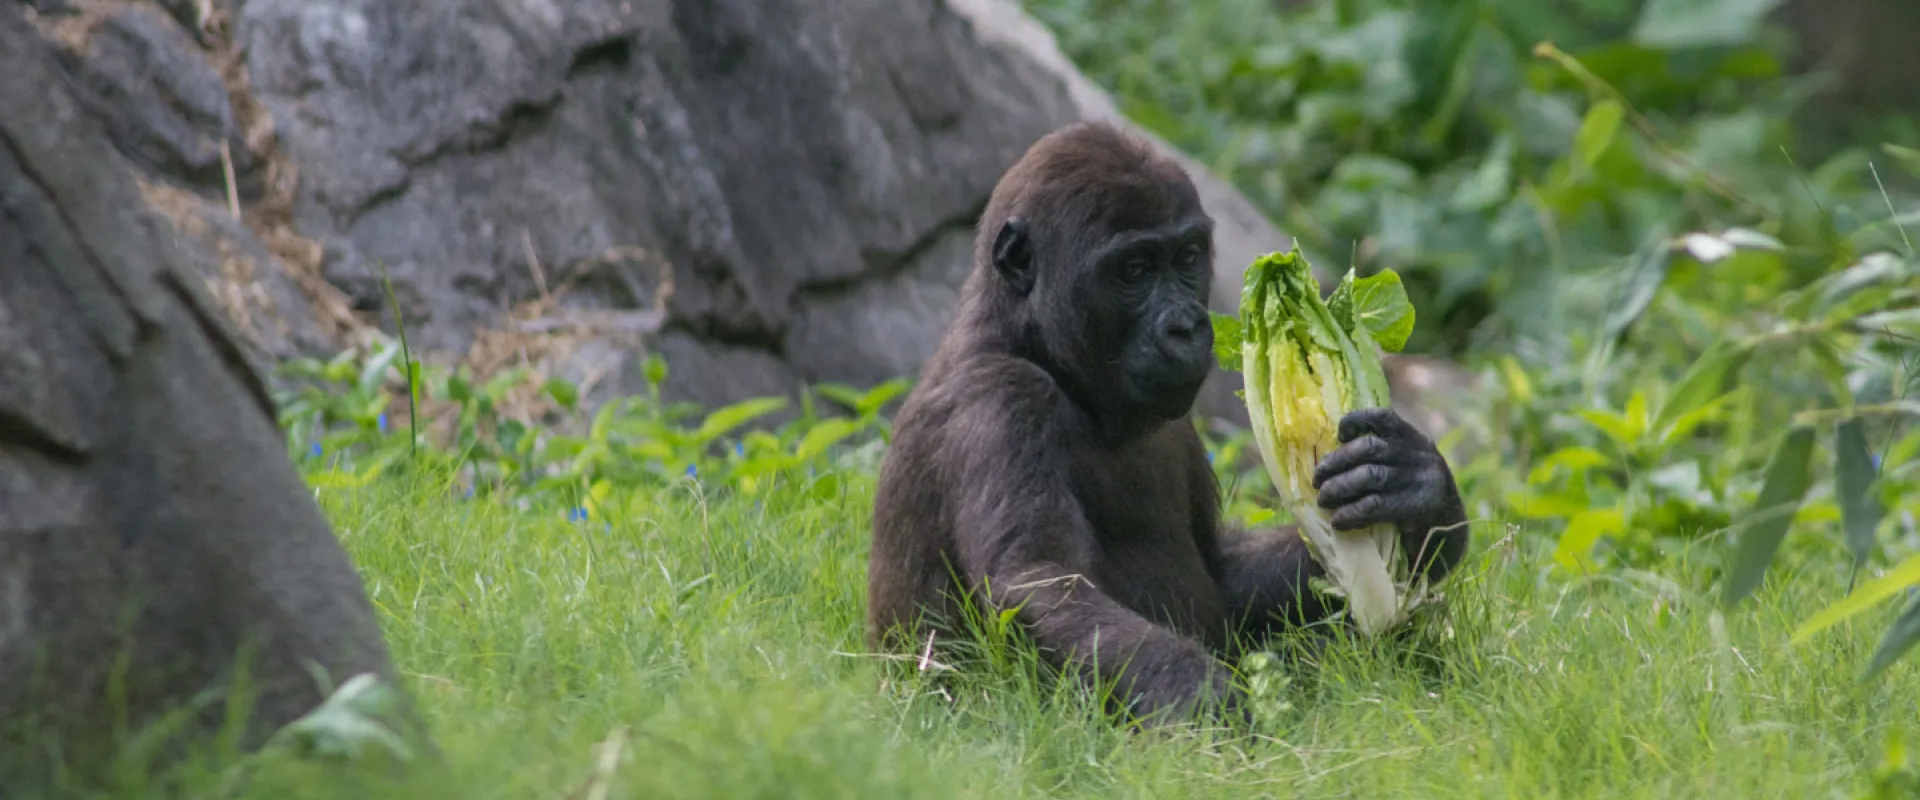 Zoo Research: A Gorilla Sized Challenge!